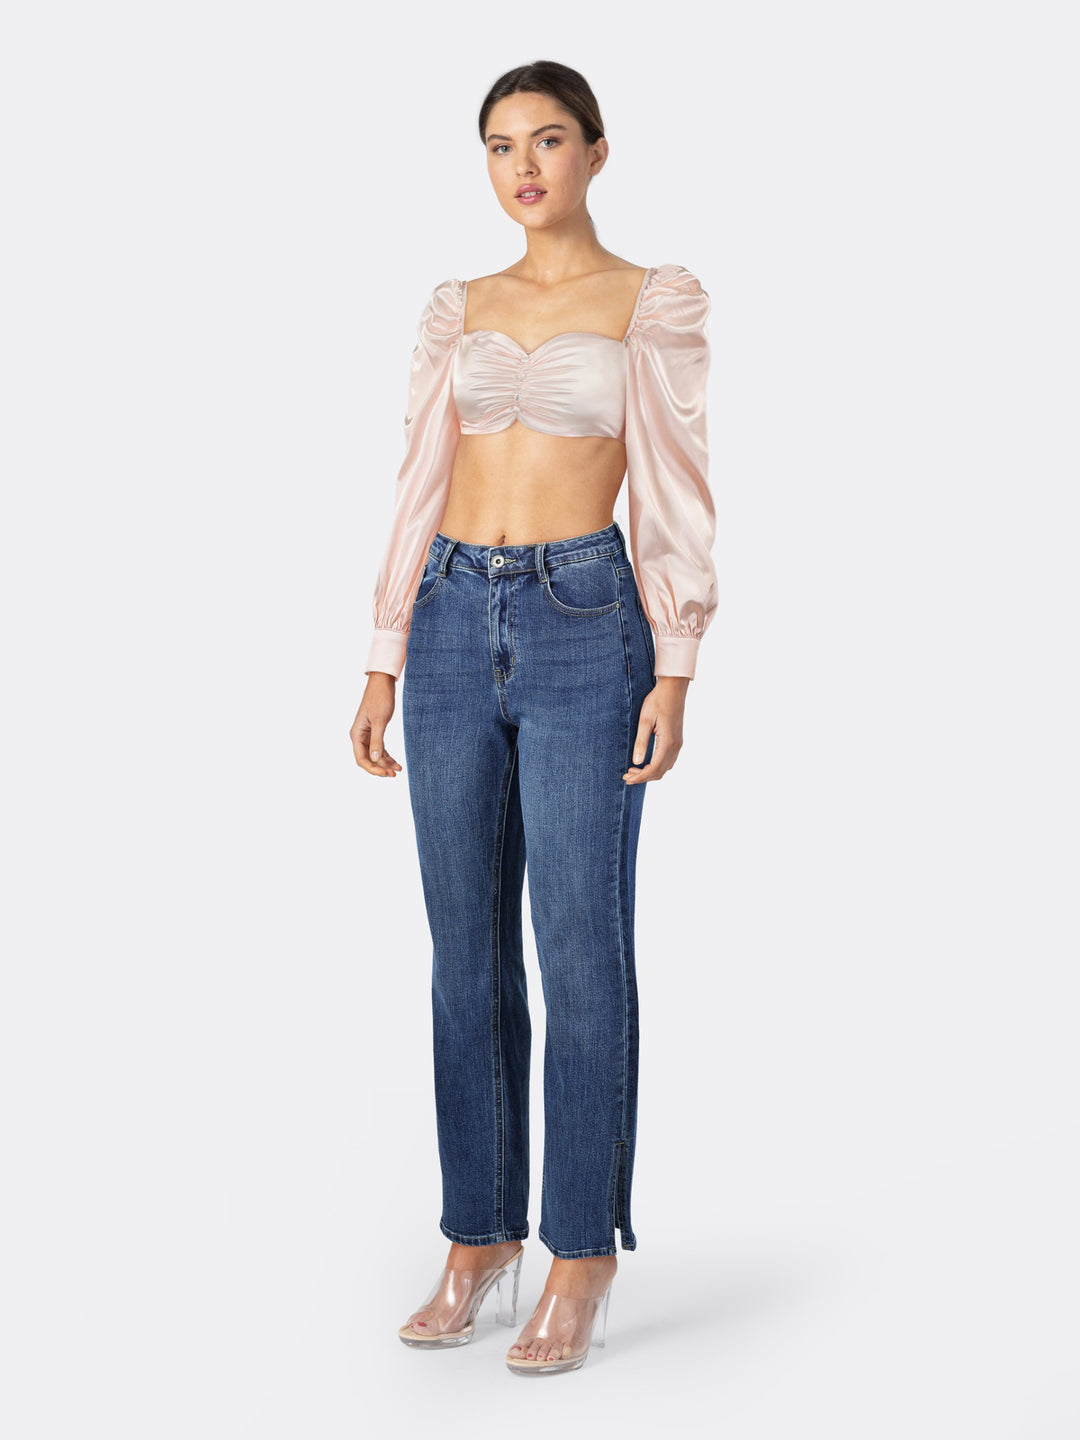 Satin Long Sleeve Crop Top with Buttons Details Pink Side